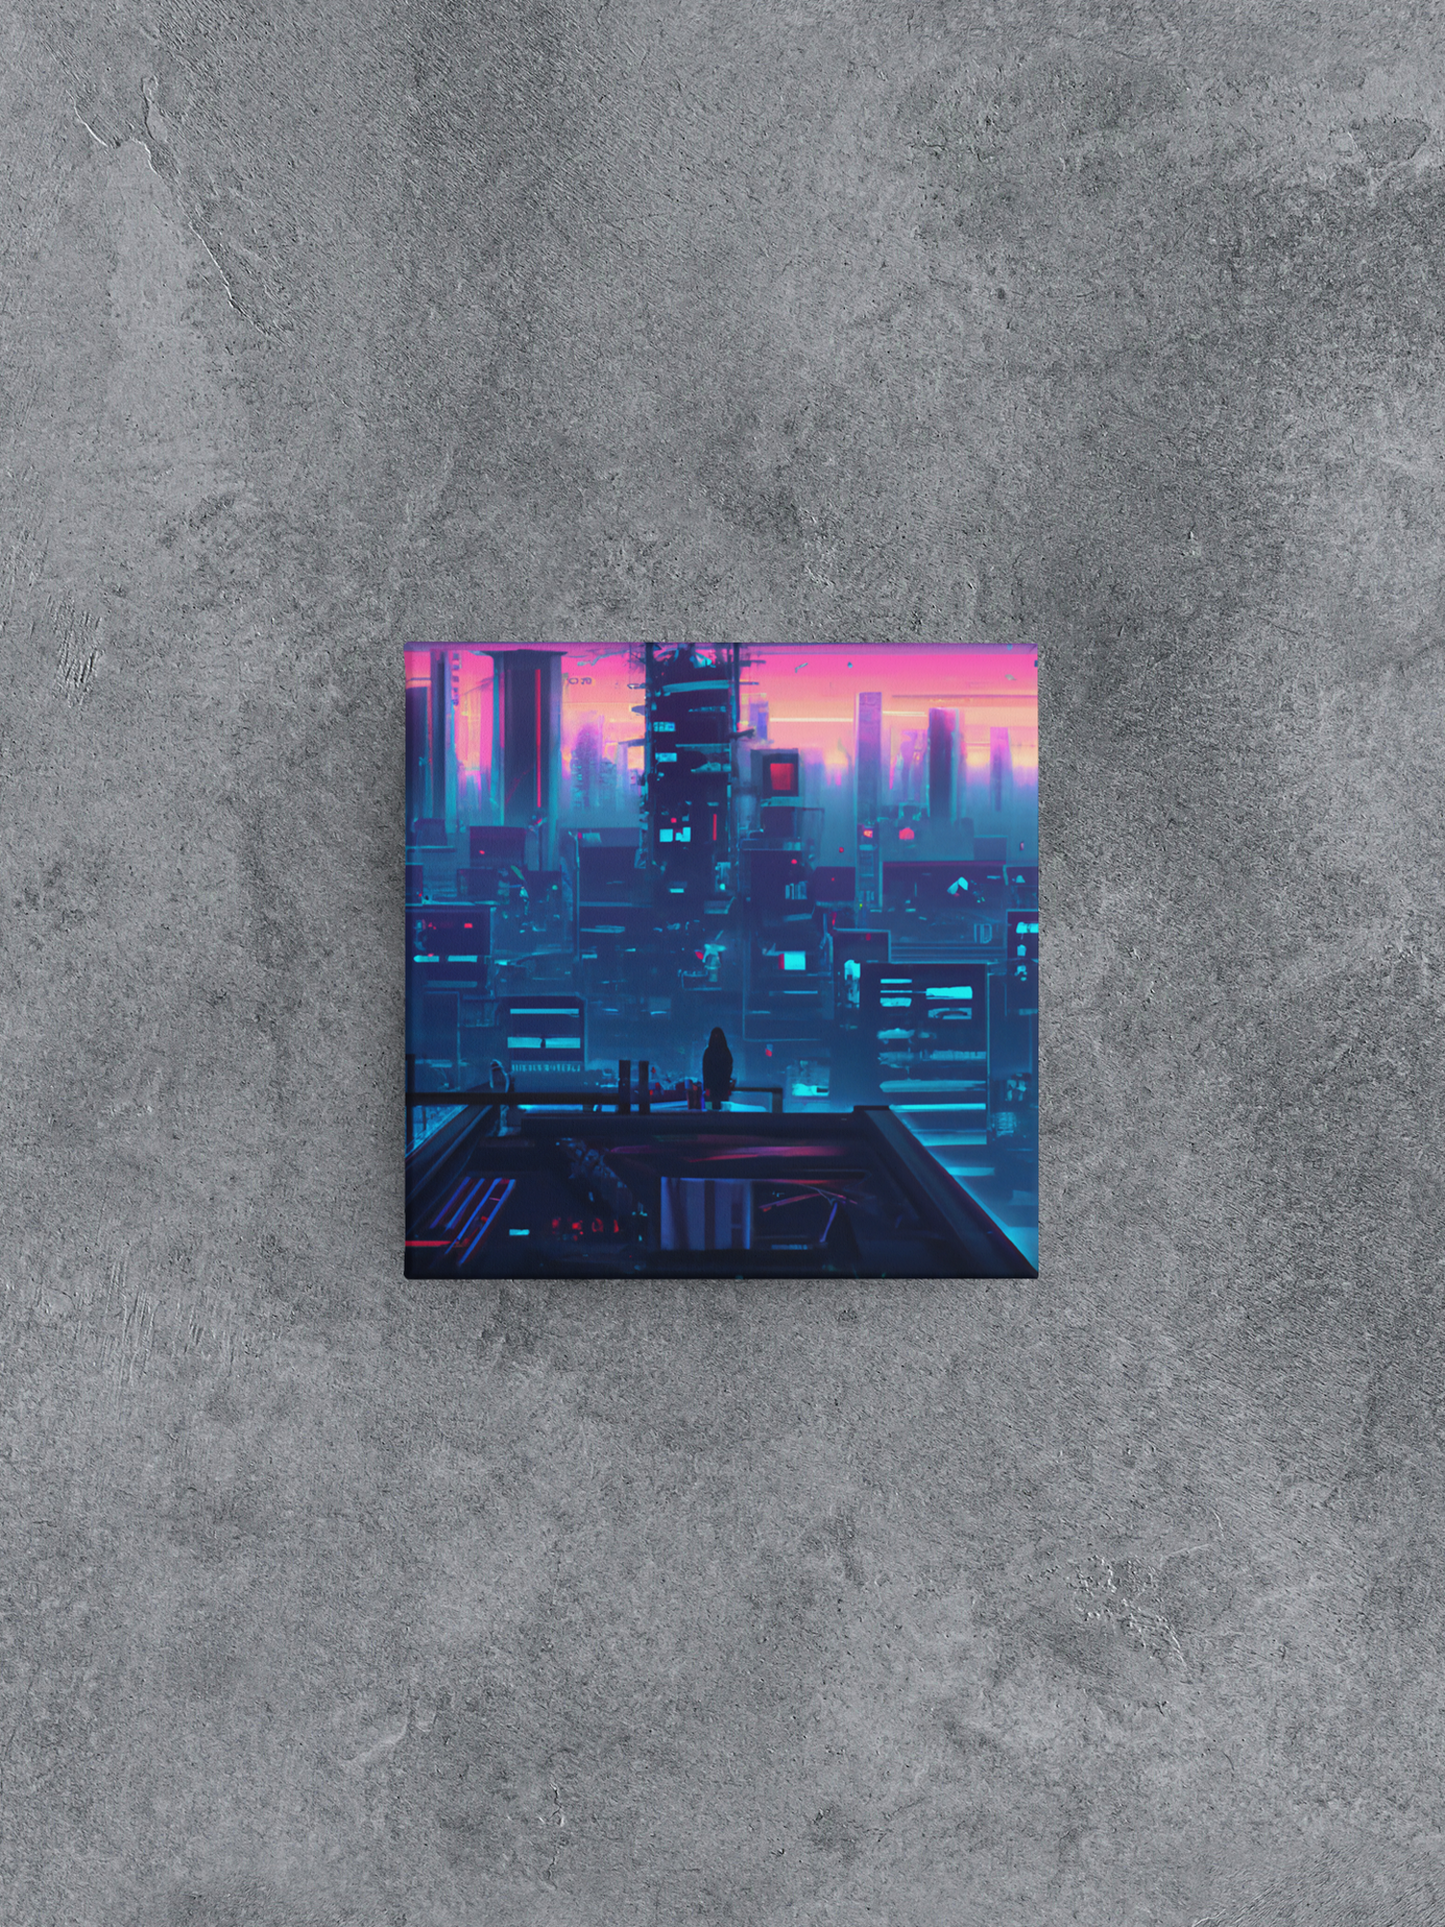 Cyberpunk City Rooftop View at Sunset Canvas Wall Art, Sci-Fi Stretched Canvas Print, Futuristic Dystopian Wall Decor, Cyberpunk Canvas